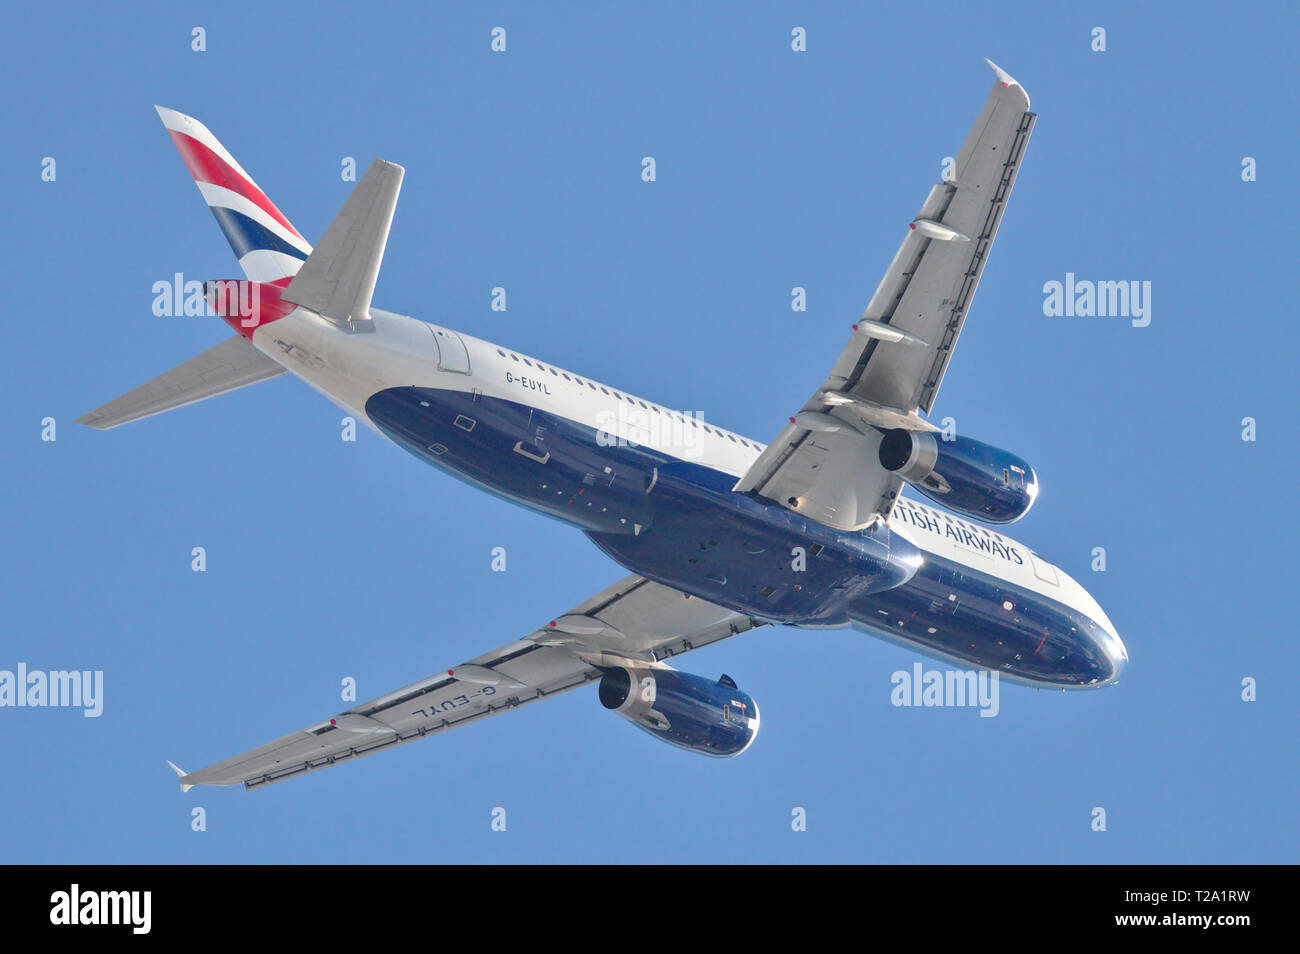 British Airways Airbus A330 after takeoff from Helsinki-Vantaa airport. Stock Photo